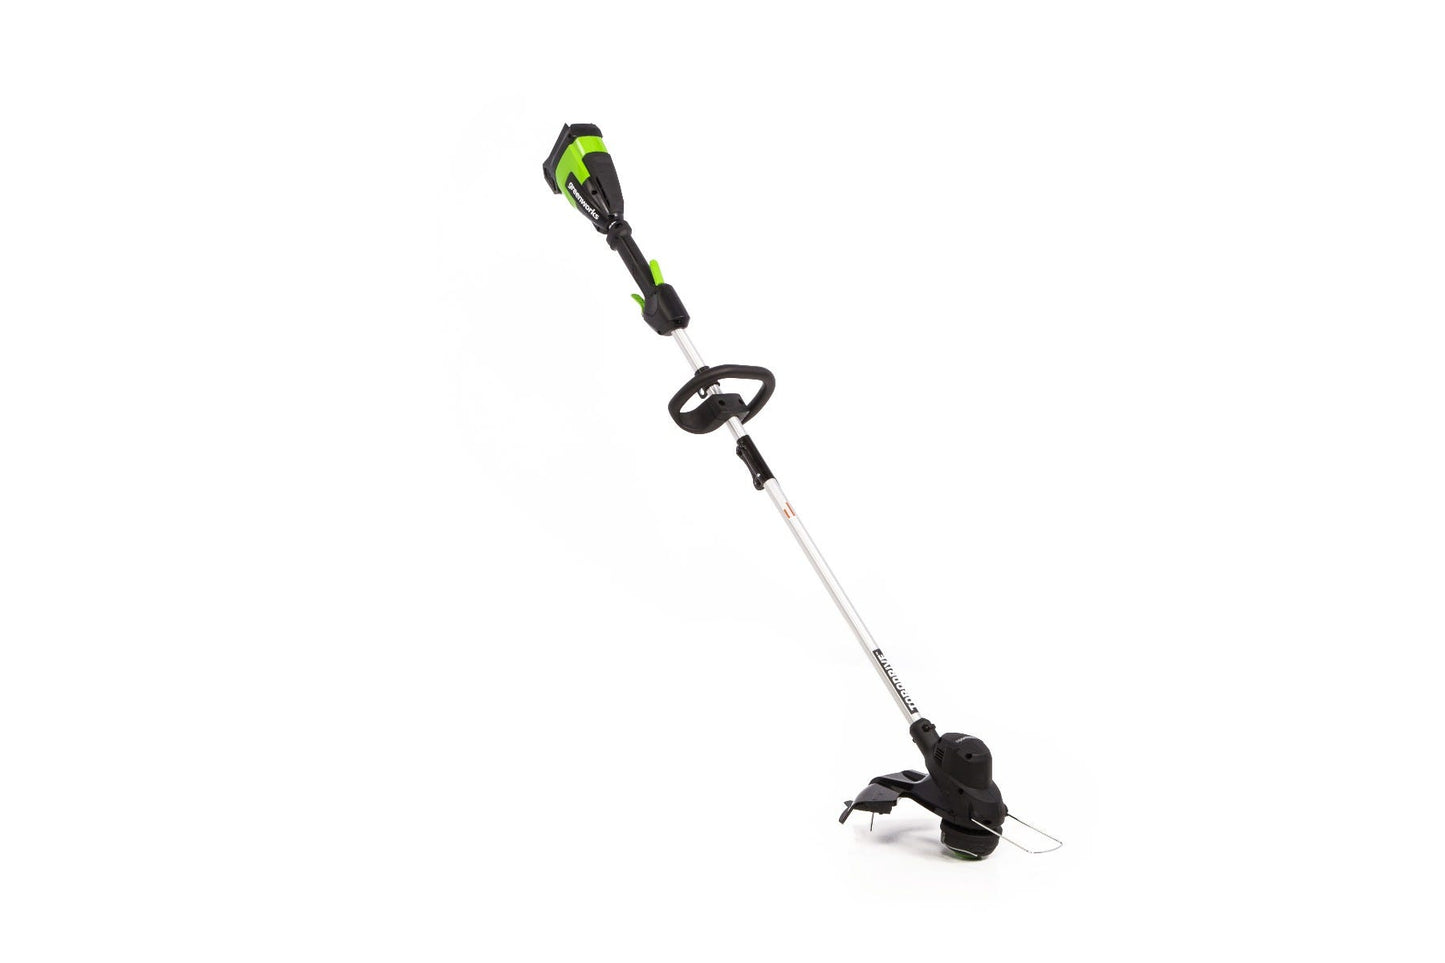 48T15 48V/24V Dual-Volt 15" String Trimmer (with Battery and Charger)